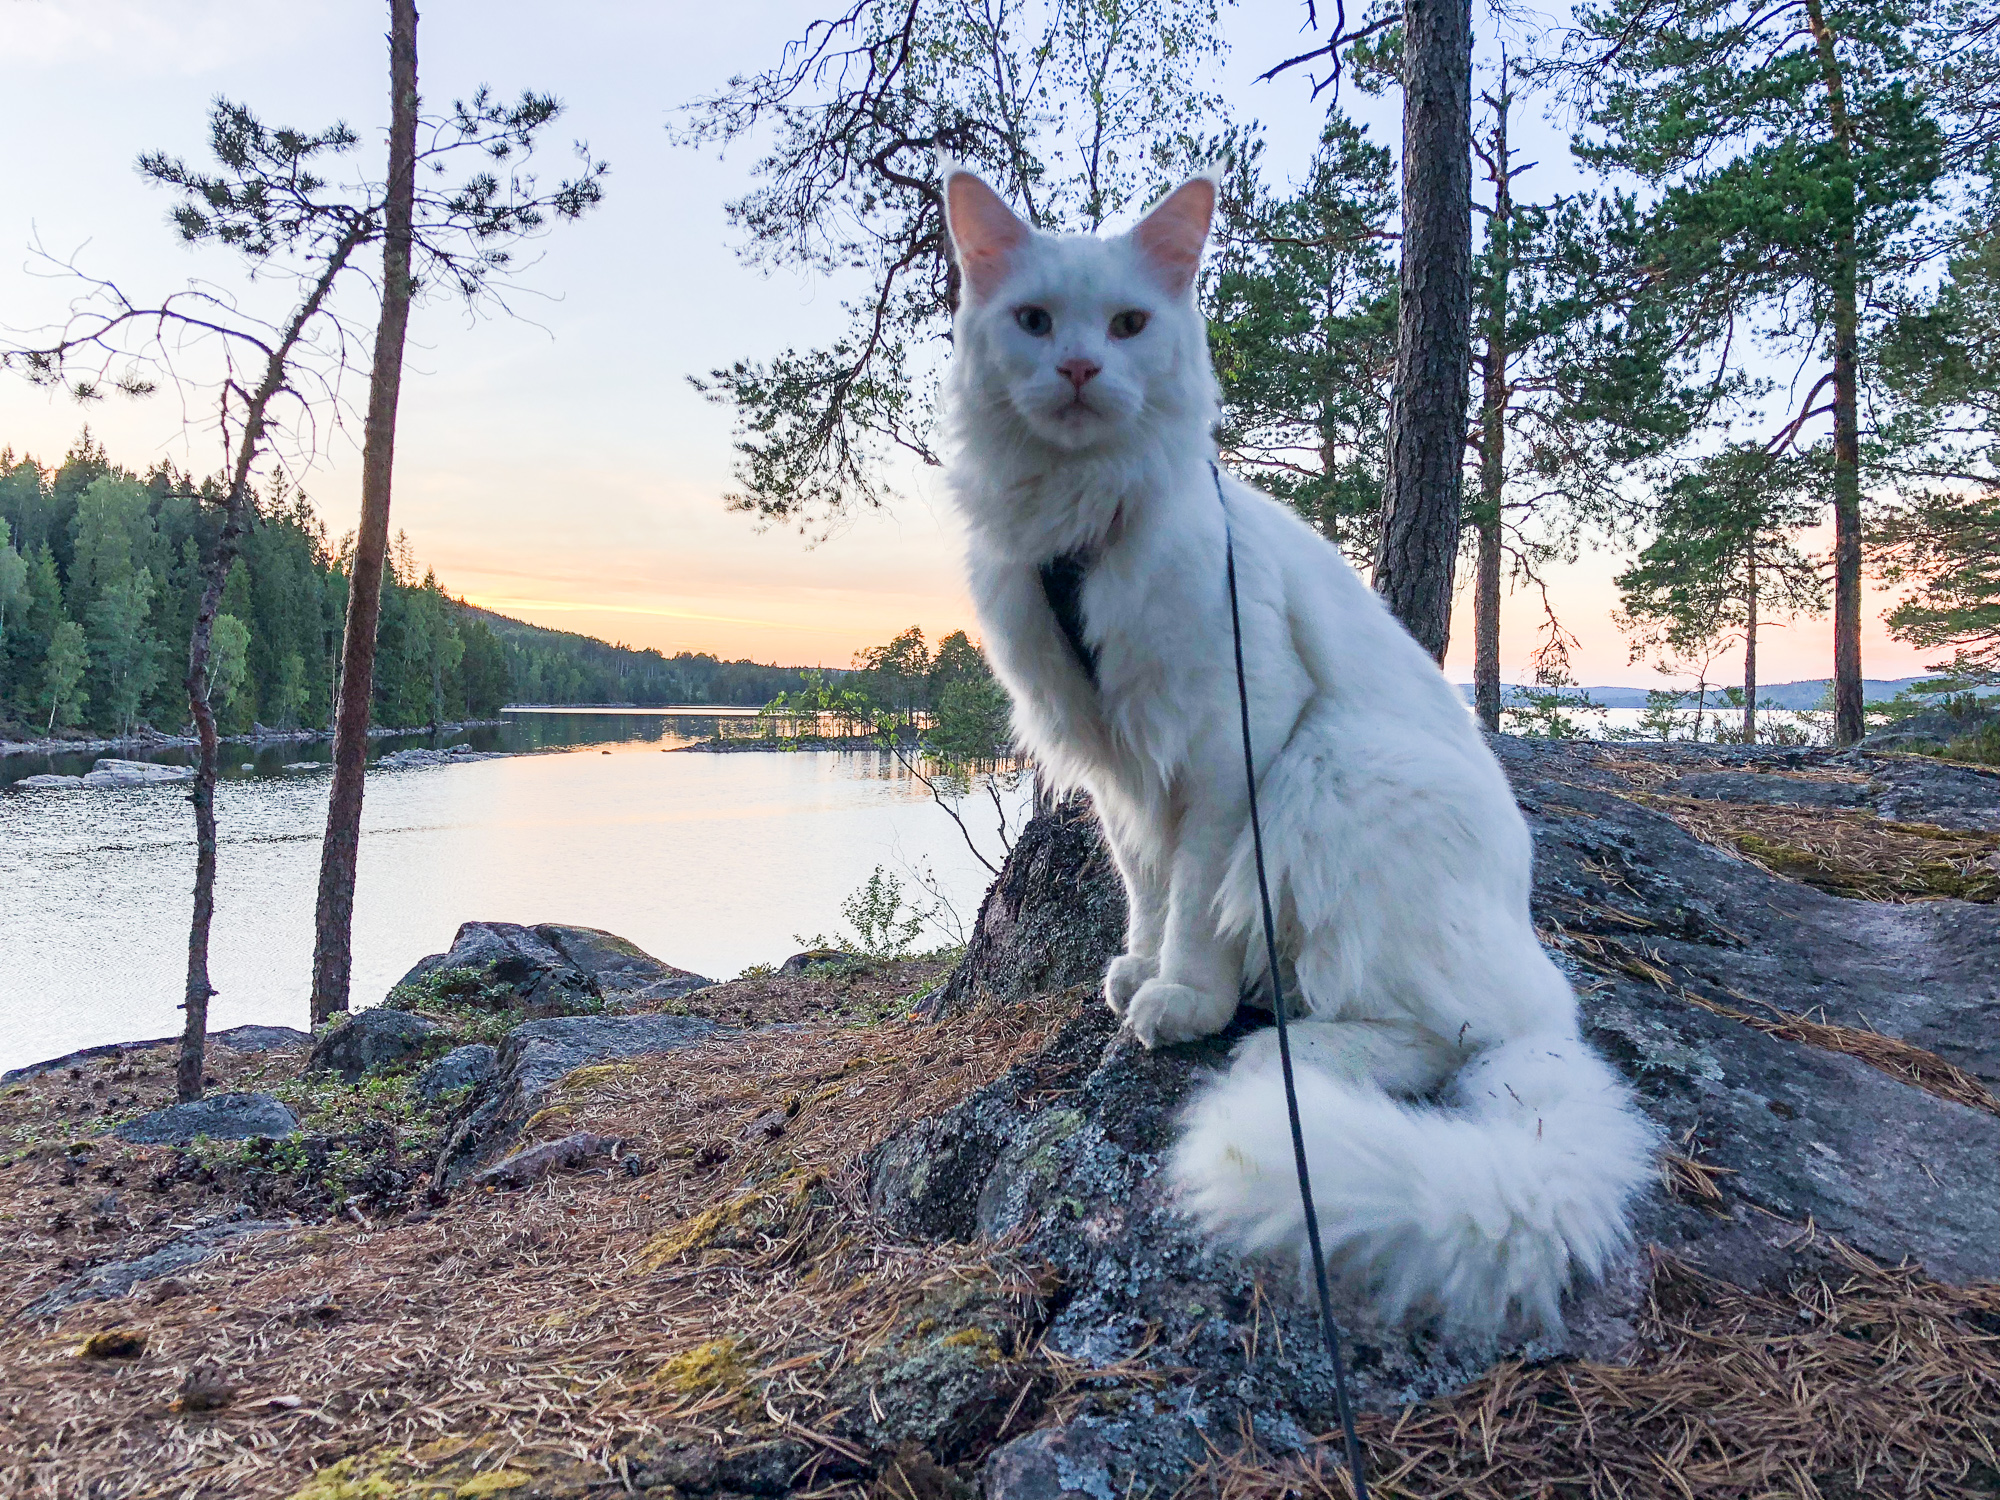 Regal Cezar poses by the water in his home country of Sweden. (Photo: Instagram/@cezars.crew)